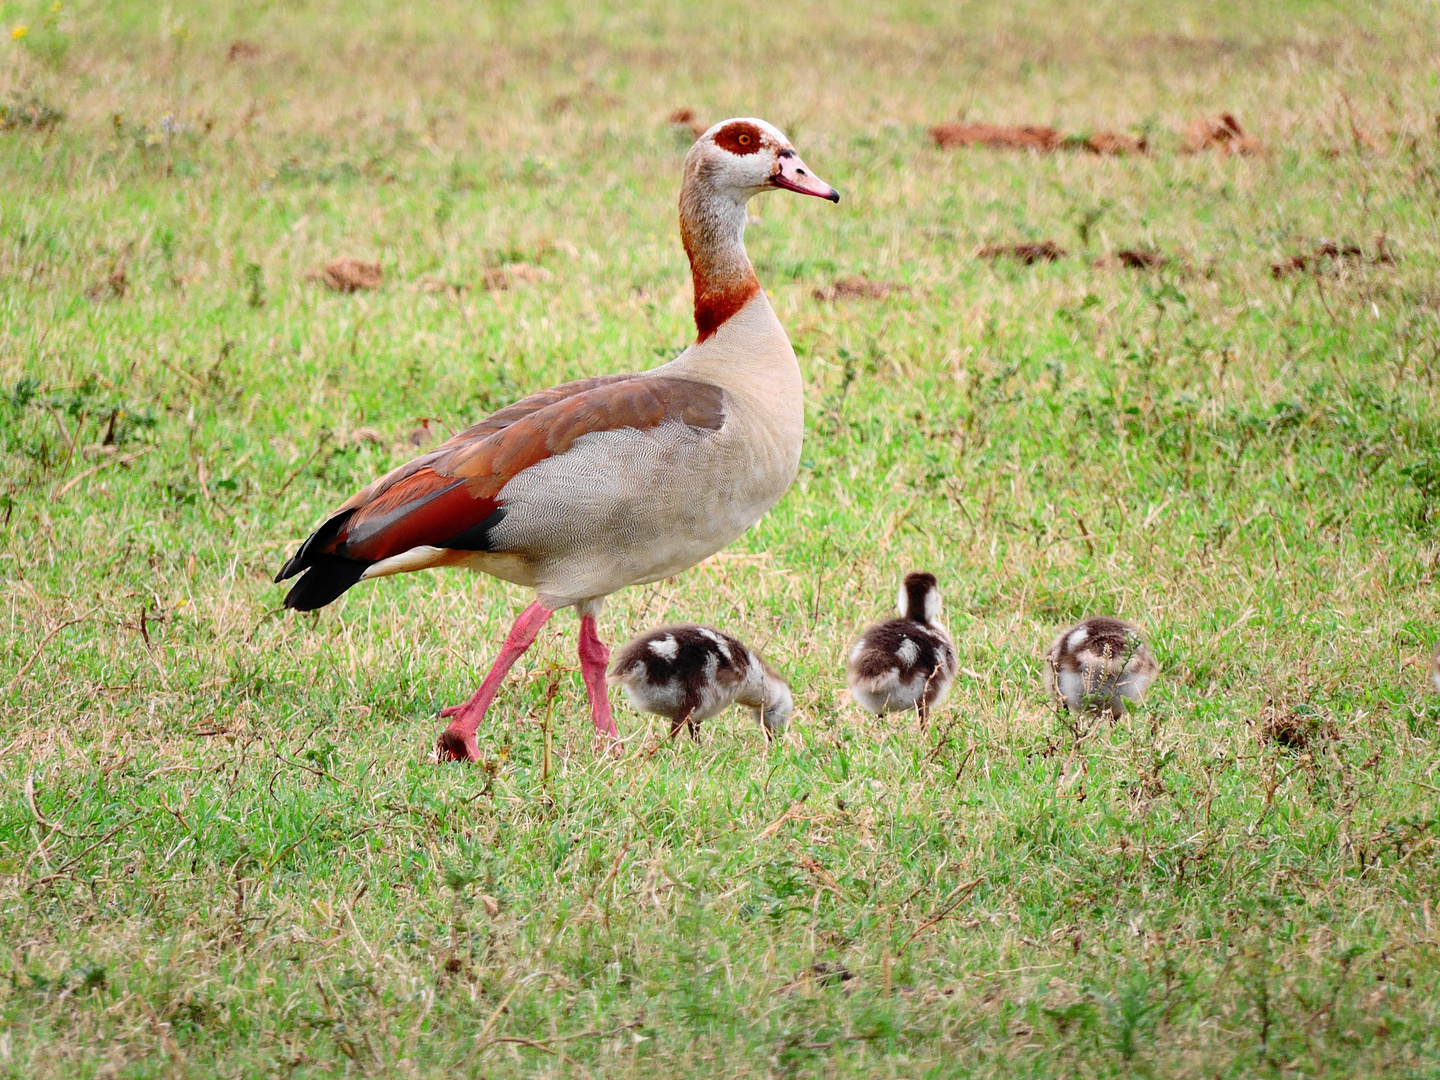 Aegyption goose with babies